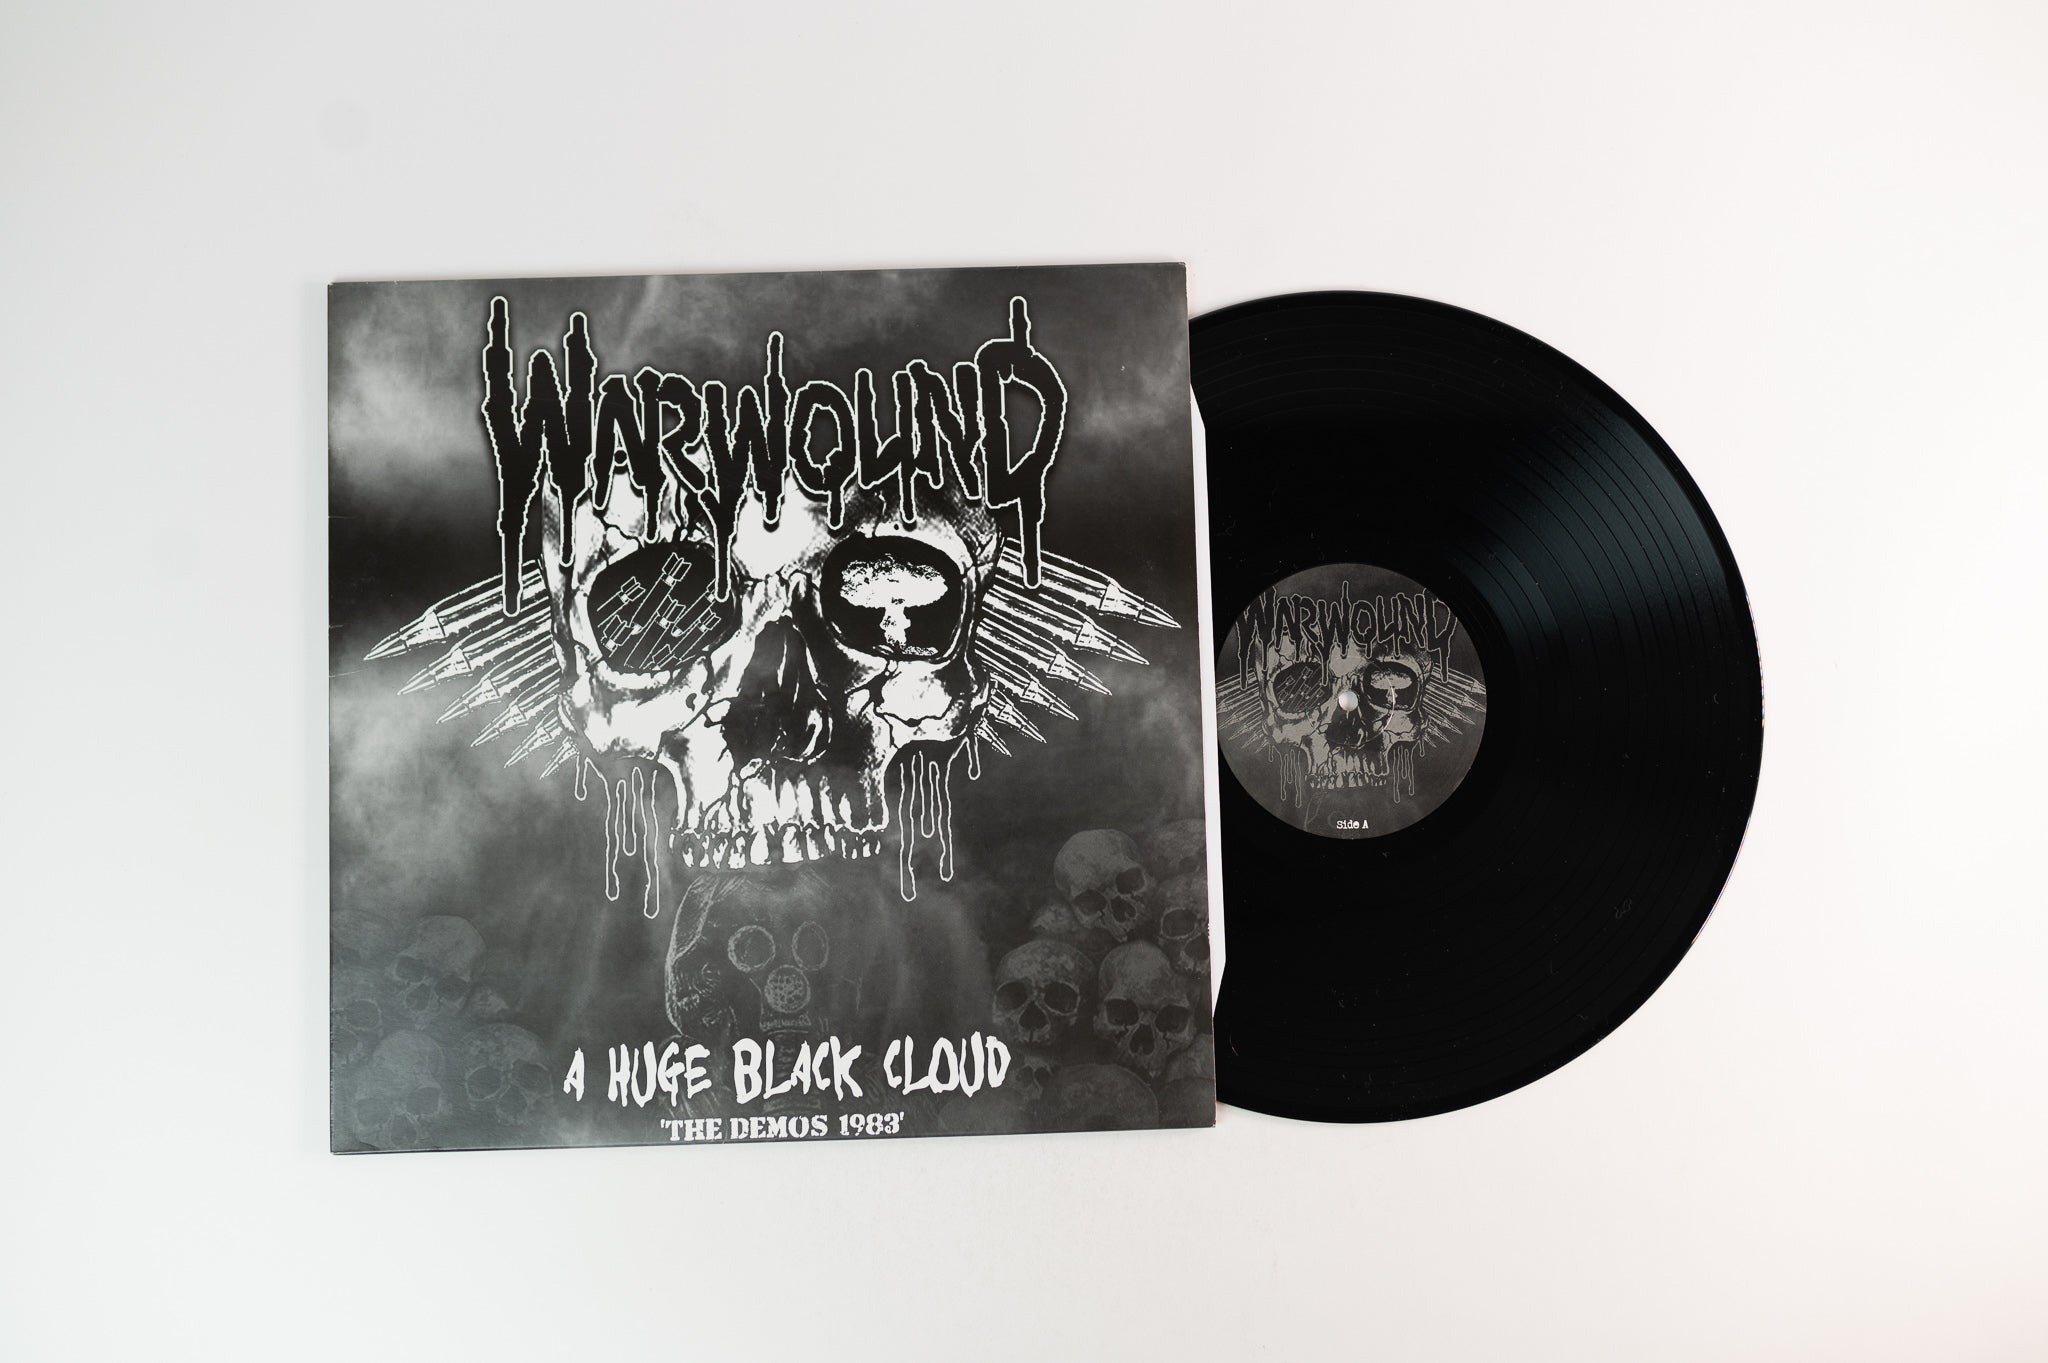 Warwound - A Huge Black Cloud: The Demos 1983 on Profane Existence